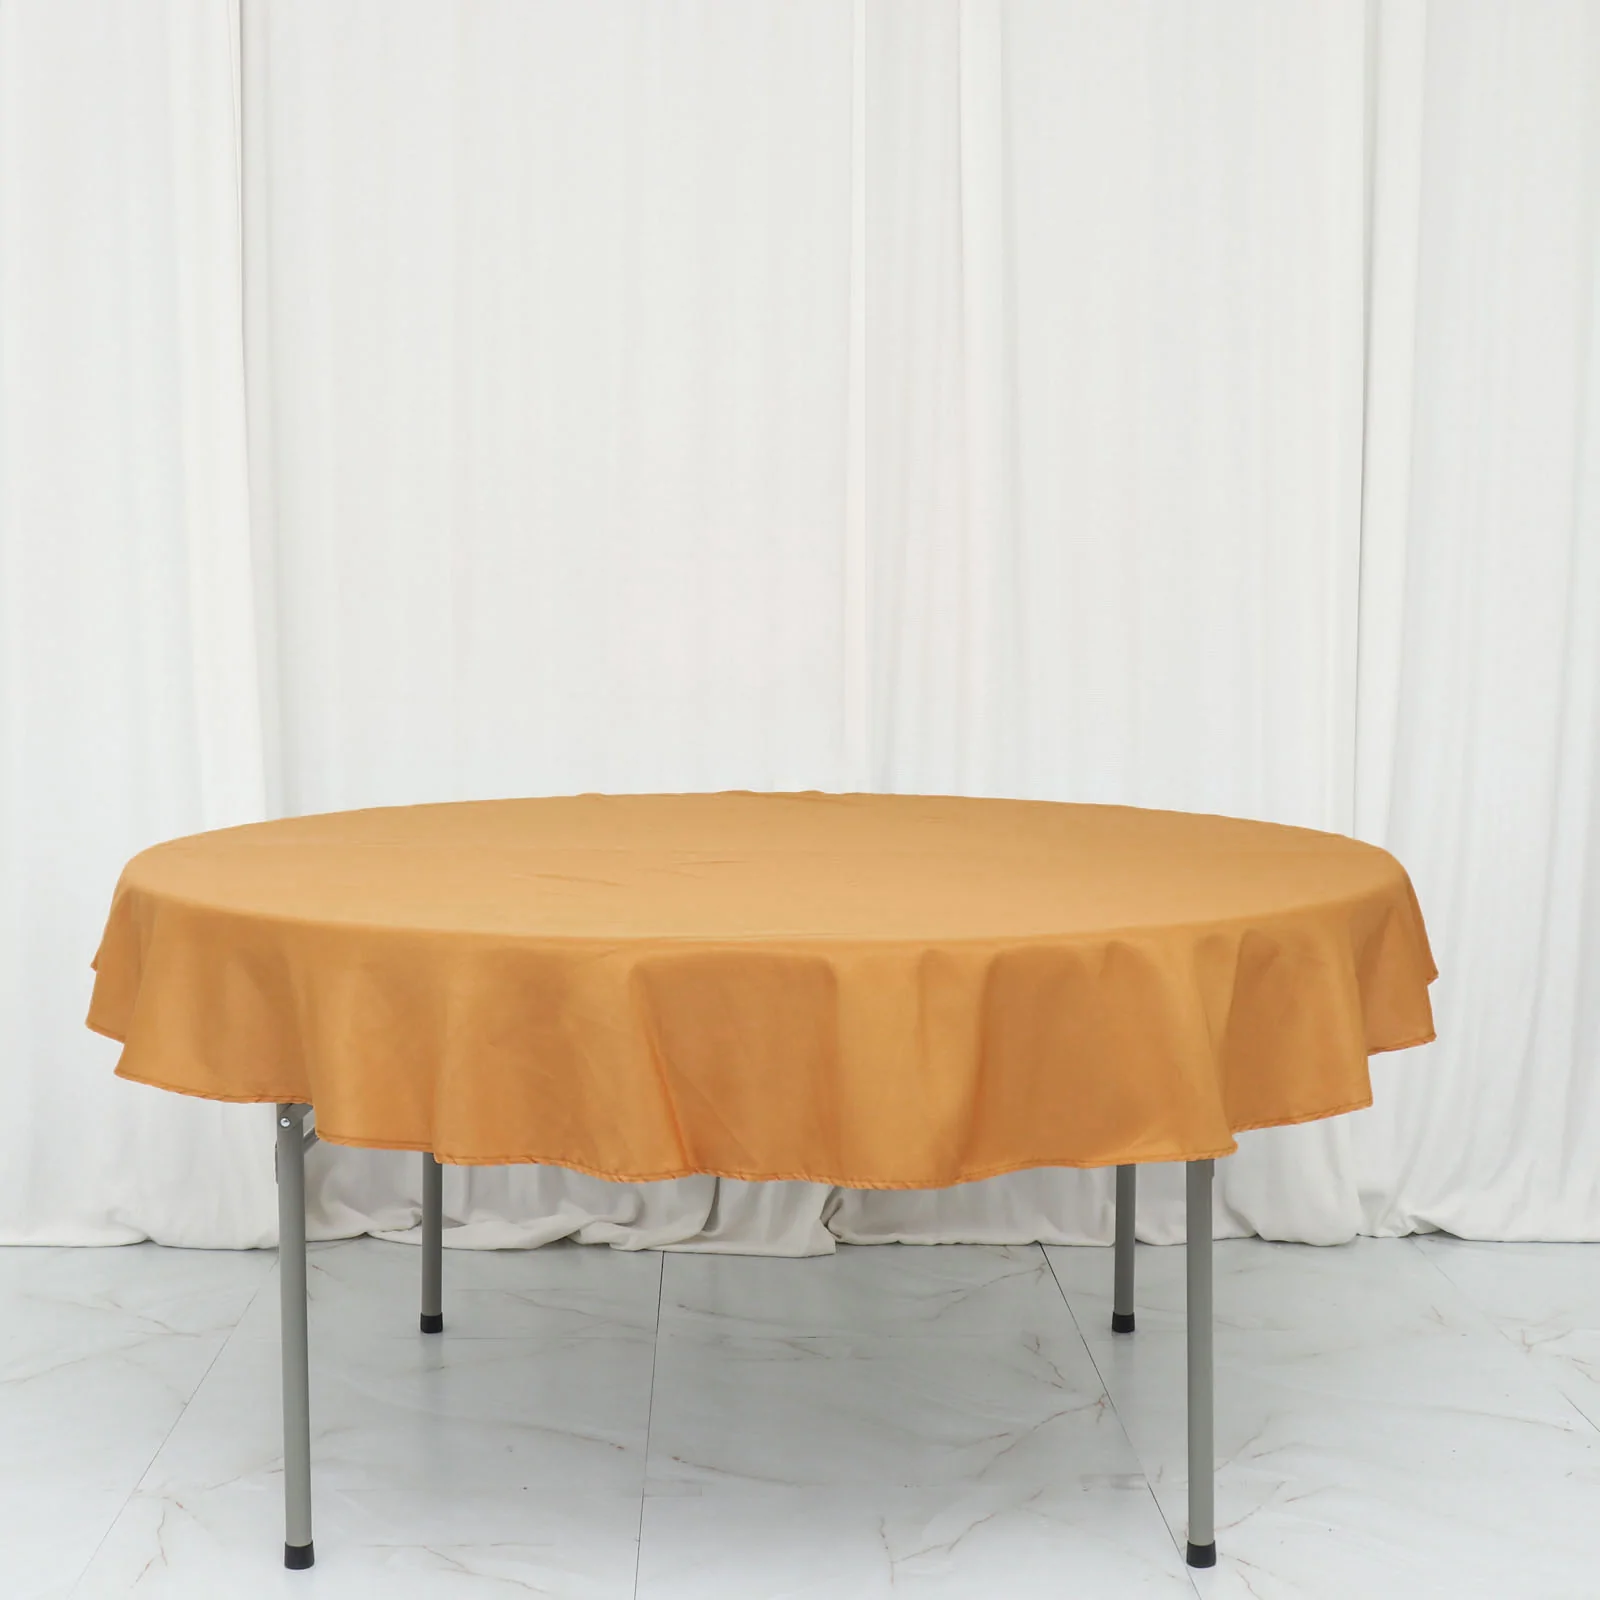 Gold - 70" Tablecloth Round Polyester Wedding Party Banquet Events   - $23.88